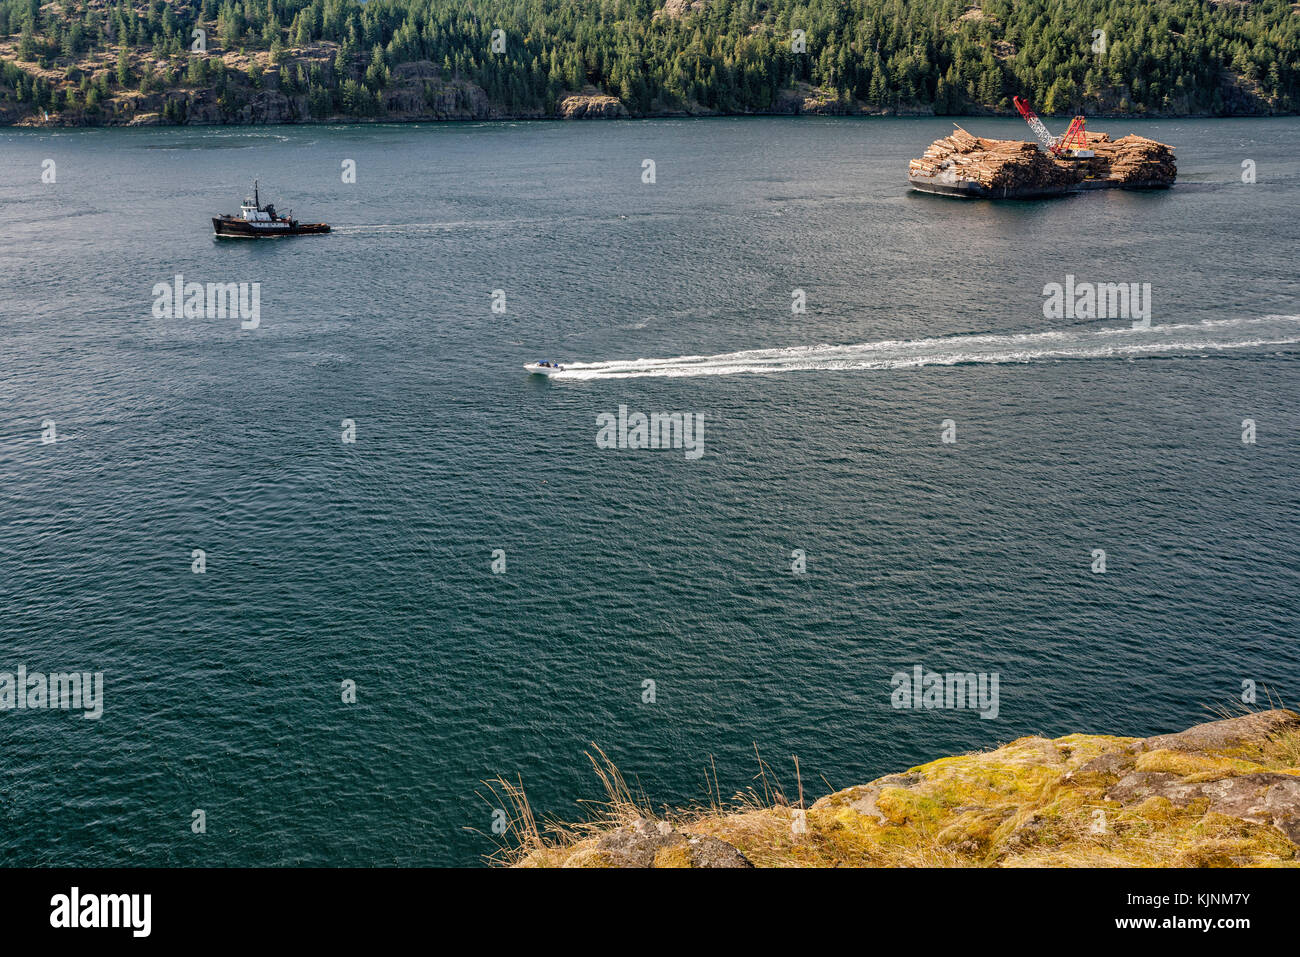 Tugboat towing ITB Beaufort Sea, barge loaded with timber, Seymour Narrows at Discovery Passage, Vancouver Island in dist, British Columbia, Canada Stock Photo